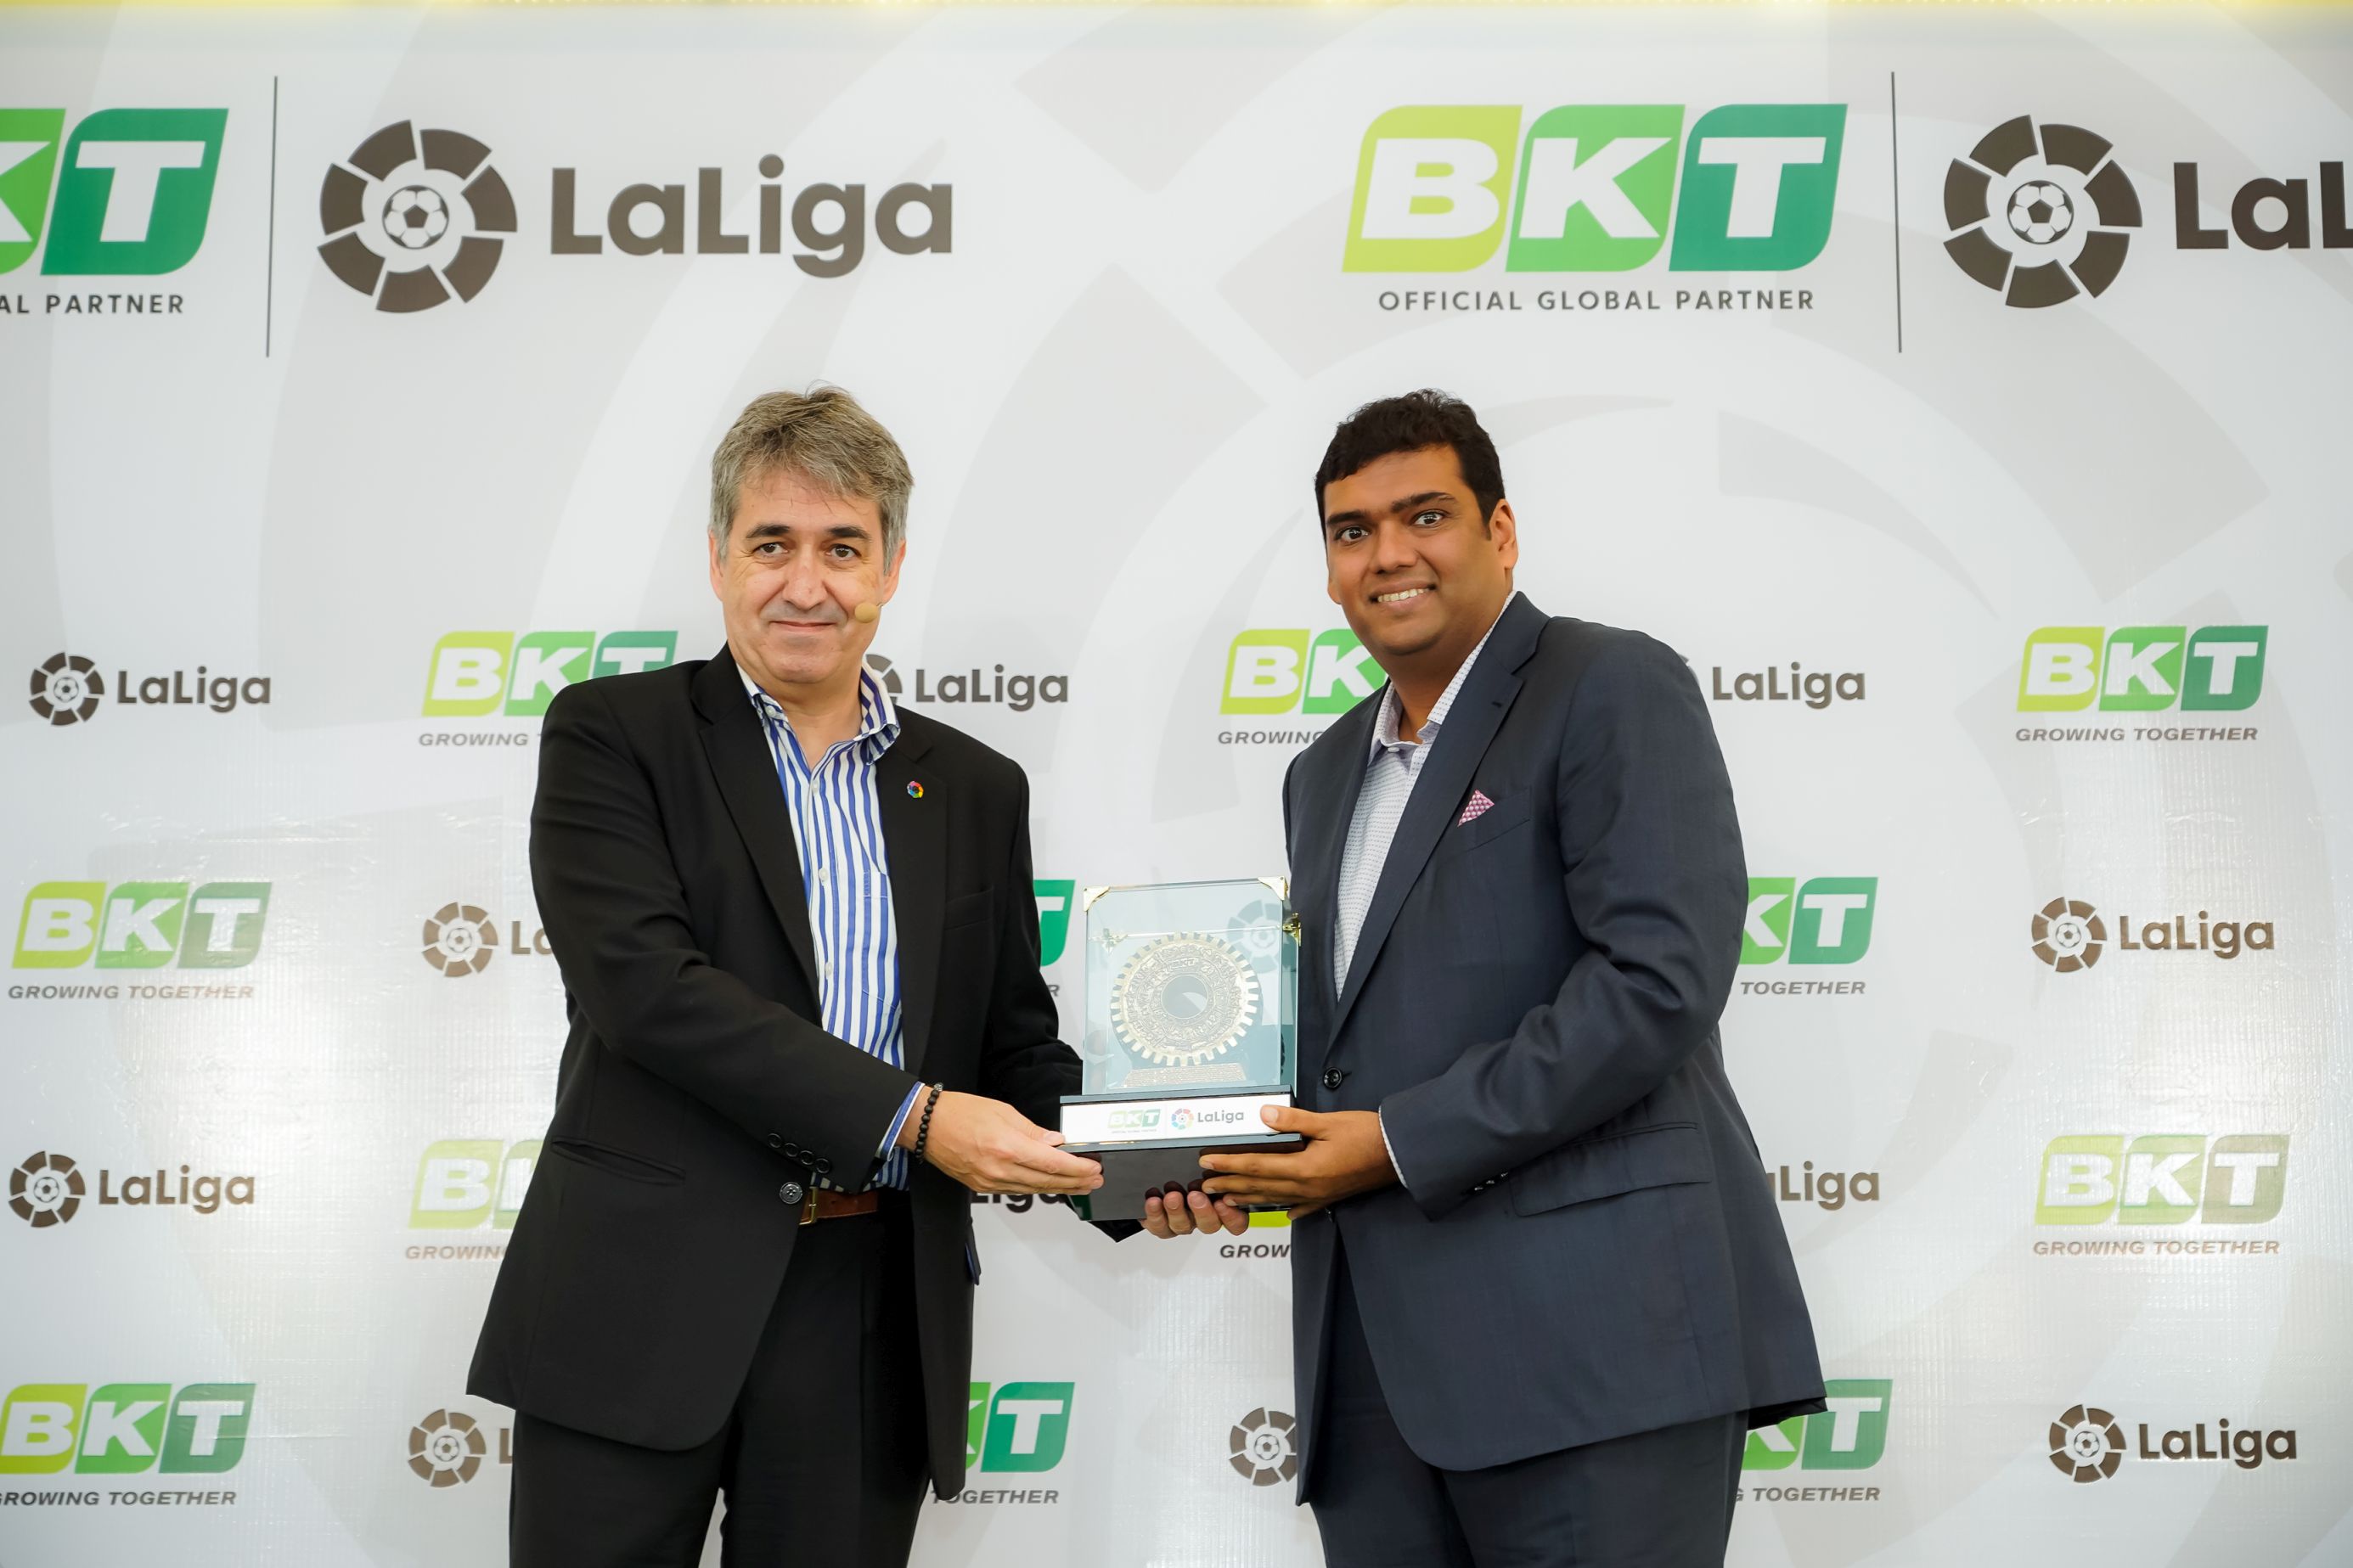 From L to R – Mr. Jose Antonio Cachaza – Managing Director – LaLiga India and Mr. Rajiv Poddar – Joint Managing Director – Balkrishna Industries Ltd. (BKT) at the partnership announcement that will see BKT as “Official Global Partner of LaLiga” for three years until the end of the 2021/2022 season in Mumbai - Photo By Sachin Murdeshwar / GPN